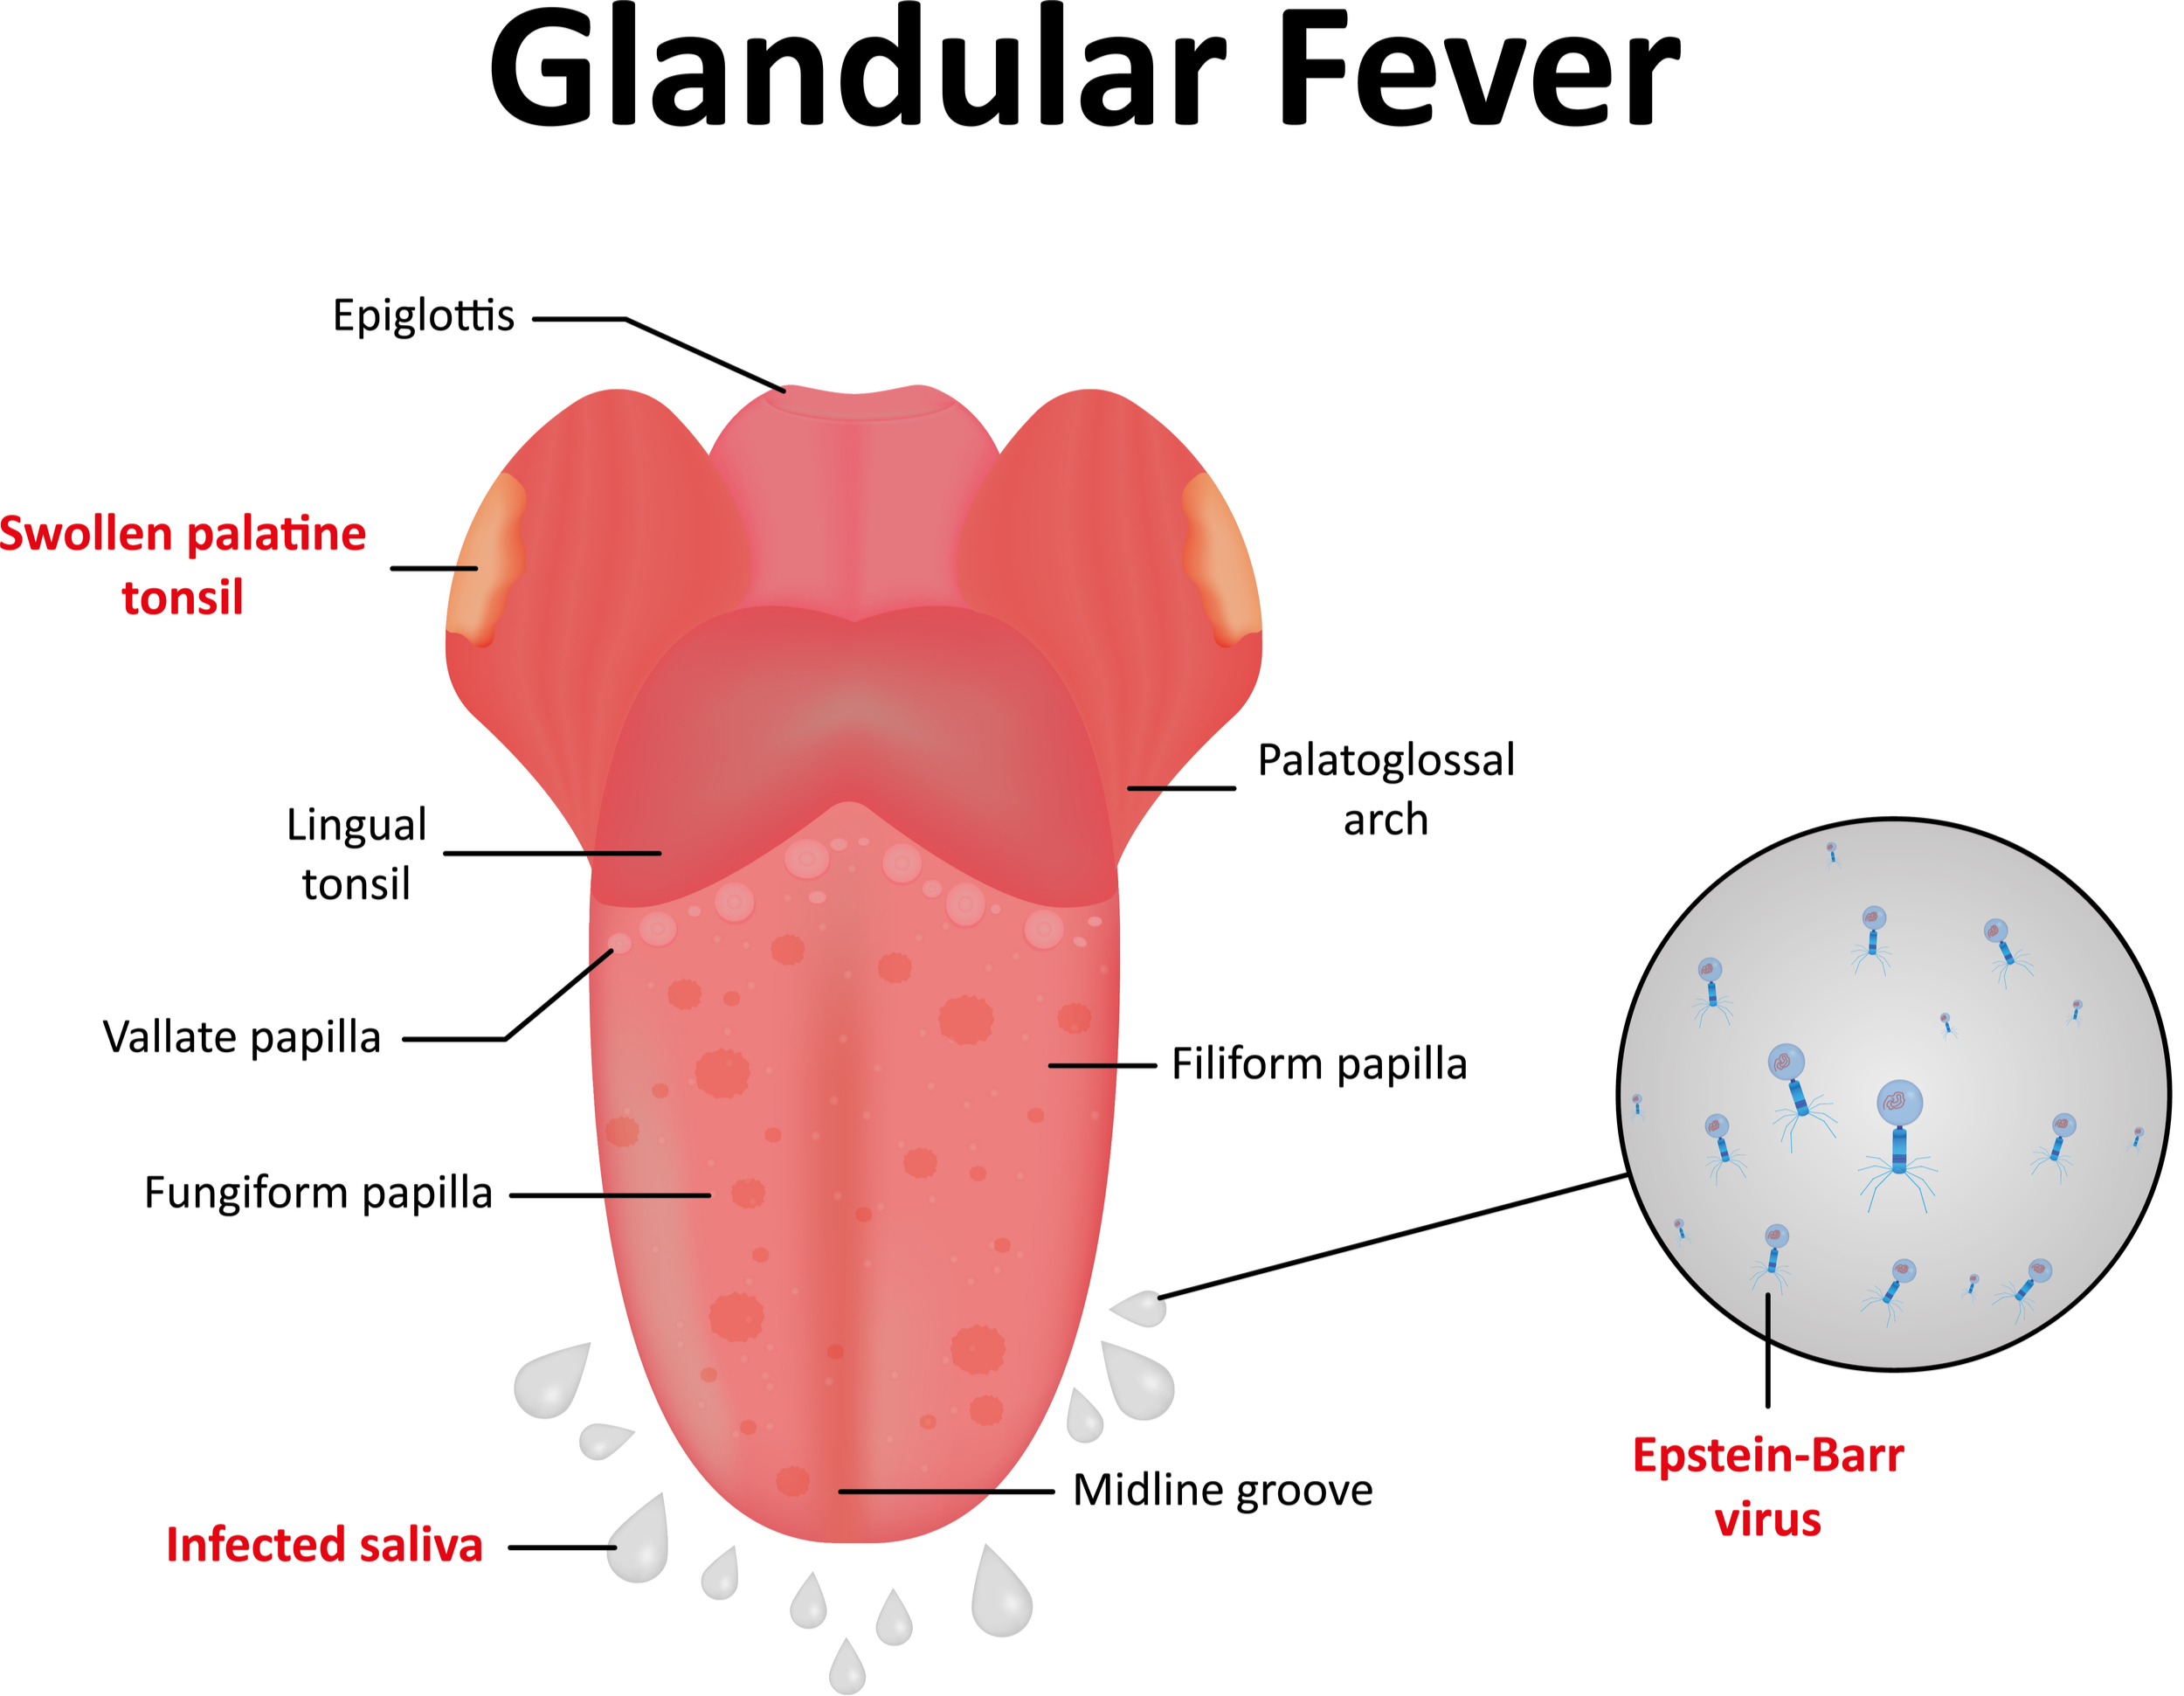 glandular fever images infectious diseases for presentations pictures